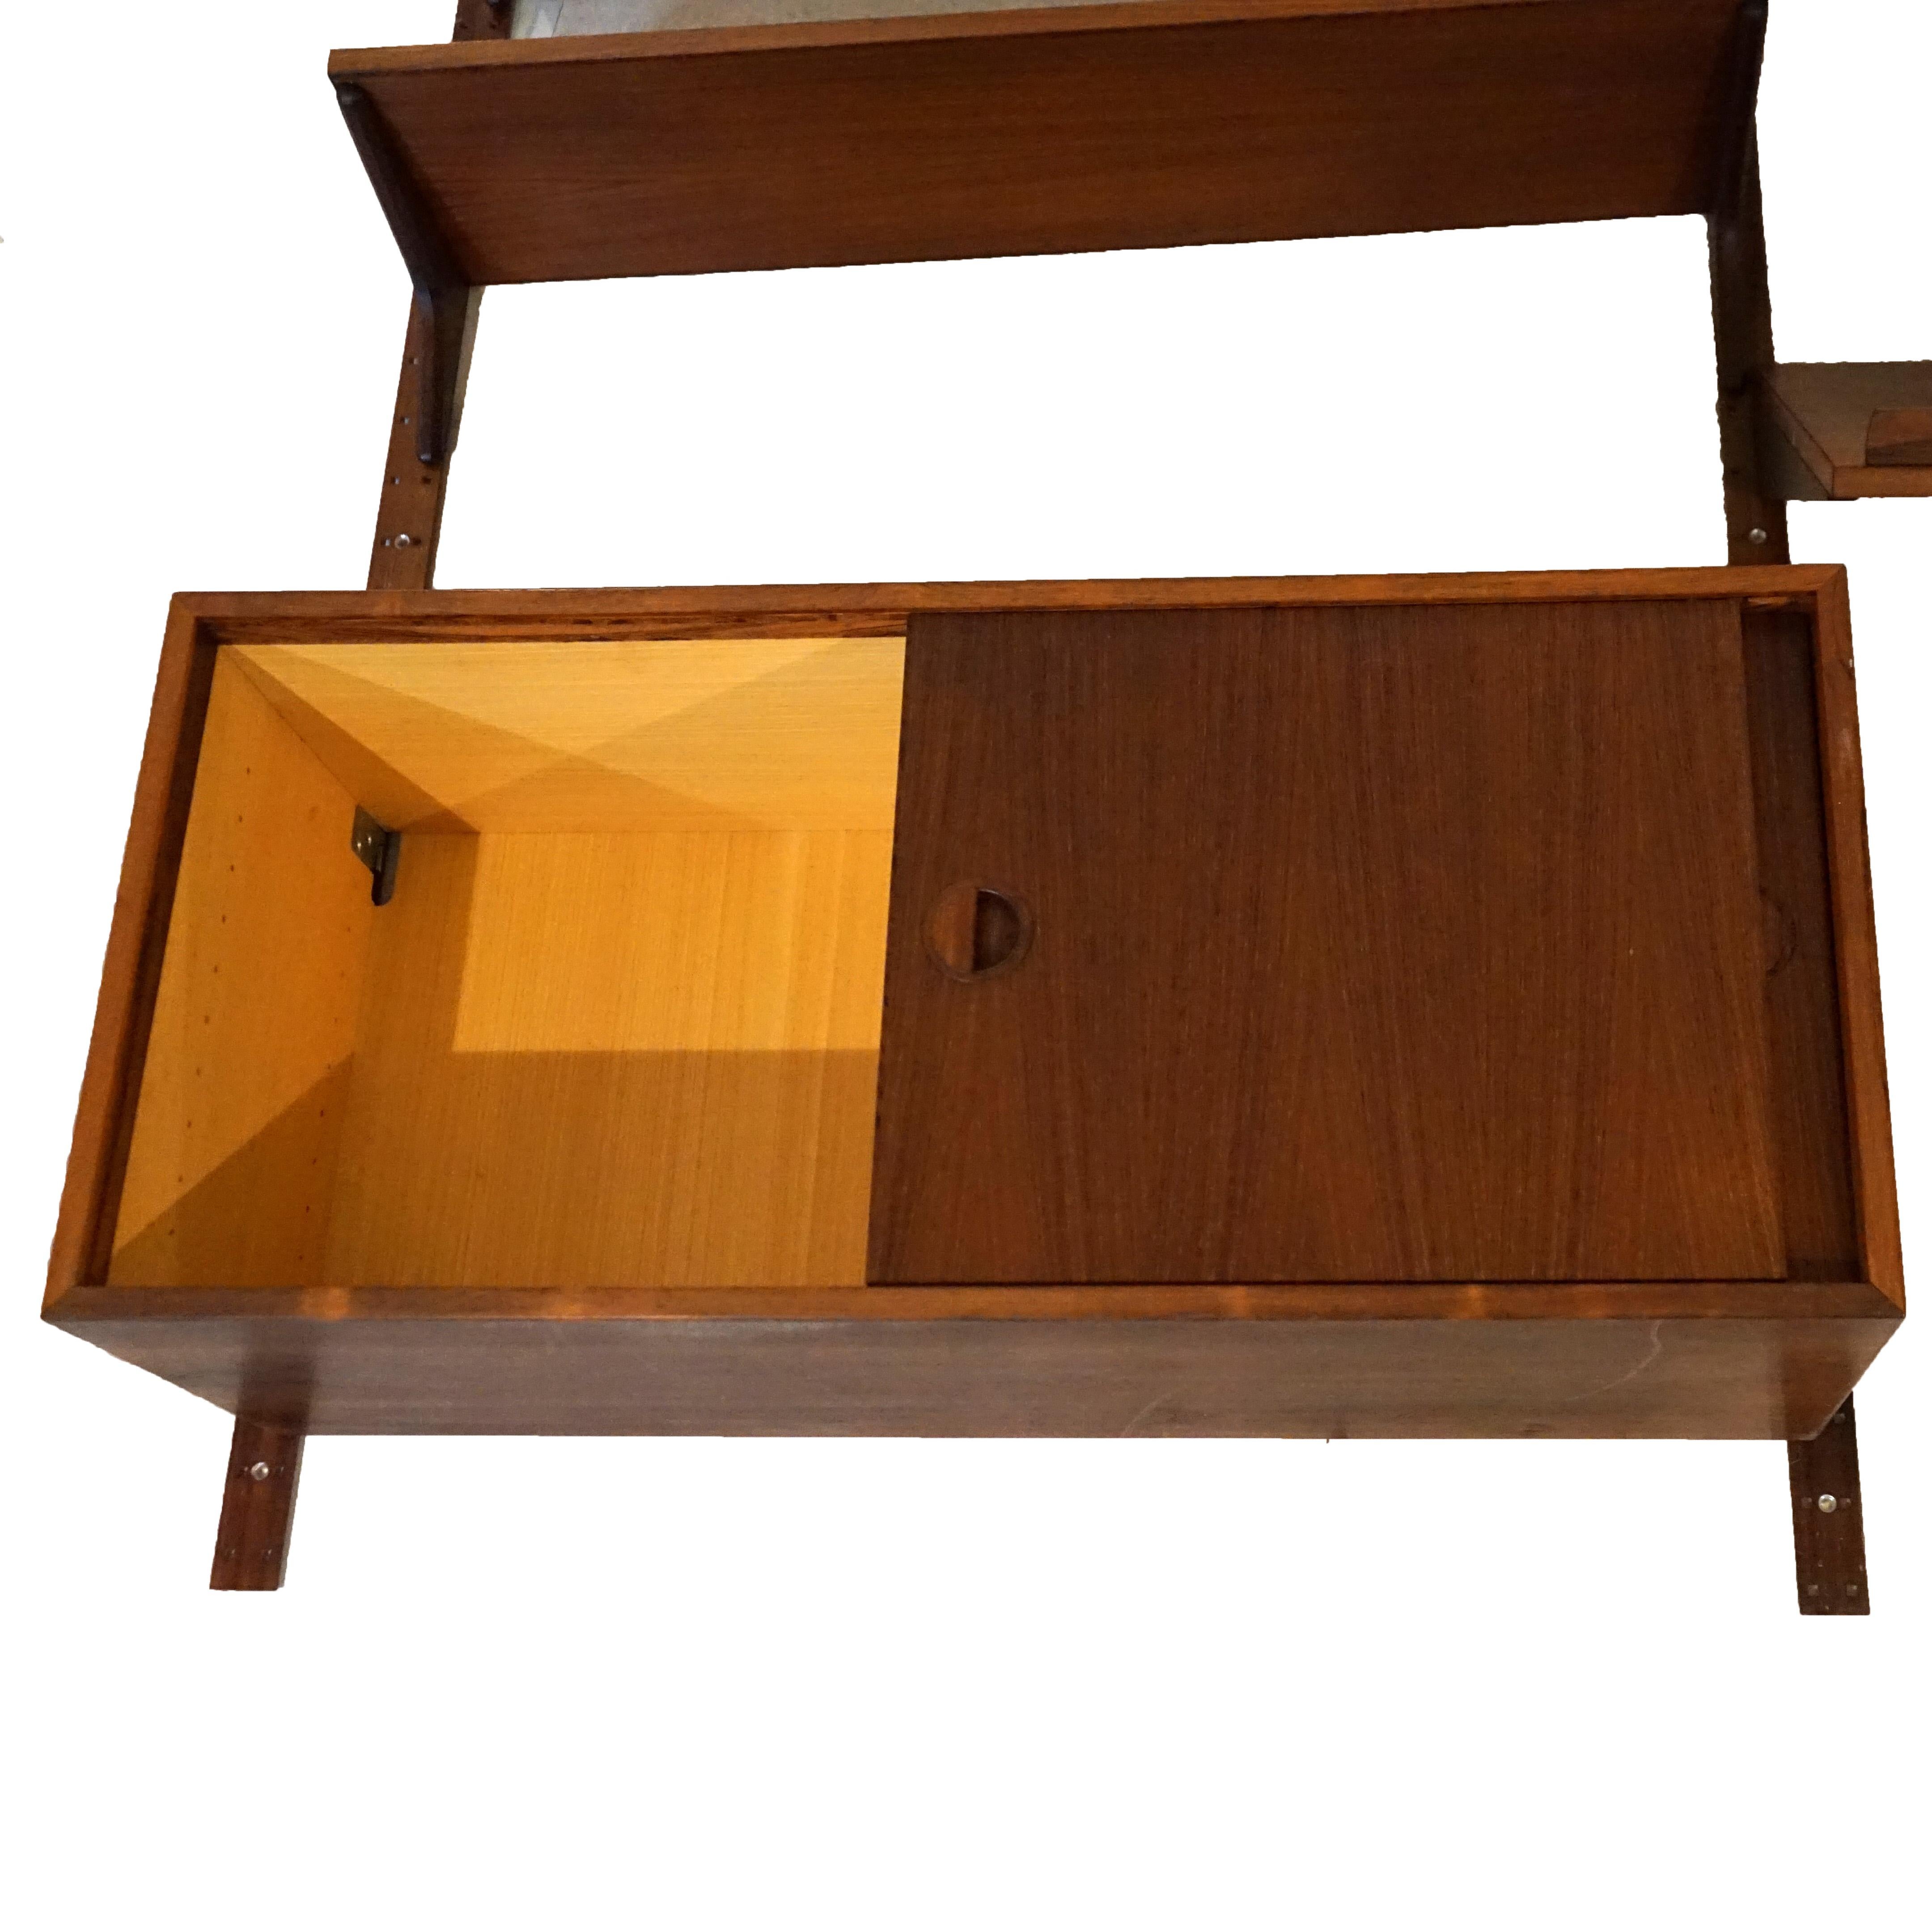 A Mid Century Danish Modern modular wall unit offers rosewood components including cabinet with tambour doors, traditional double door cabinet, writing desk, and shelves, c1950

Measures- Overall 78.5''H x 35.25''W x 16''D; Small Cabinet 16.5''H x